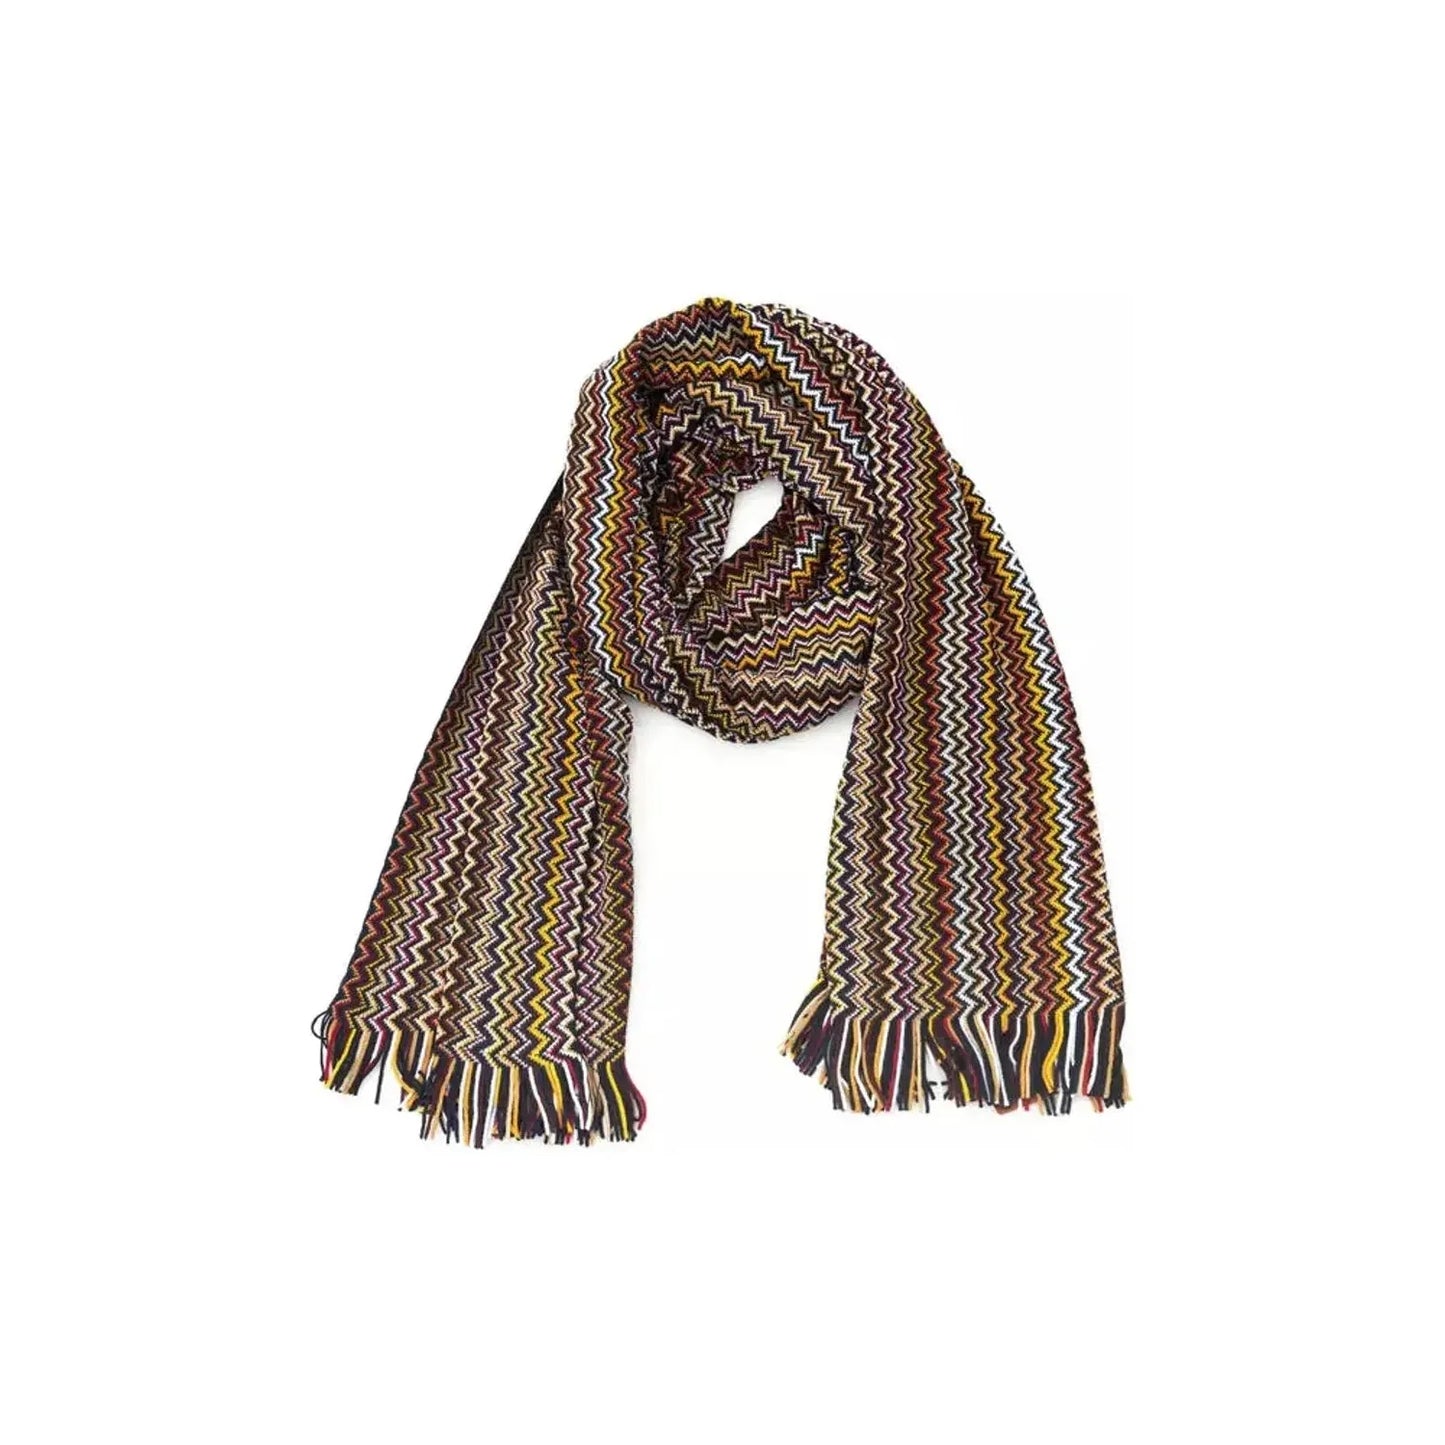 Missoni Vibrant Geometric Patterned Fringed Scarf multicolor-wool-scarf-1 product-22227-309889619-24-19db5d8d-57d.webp